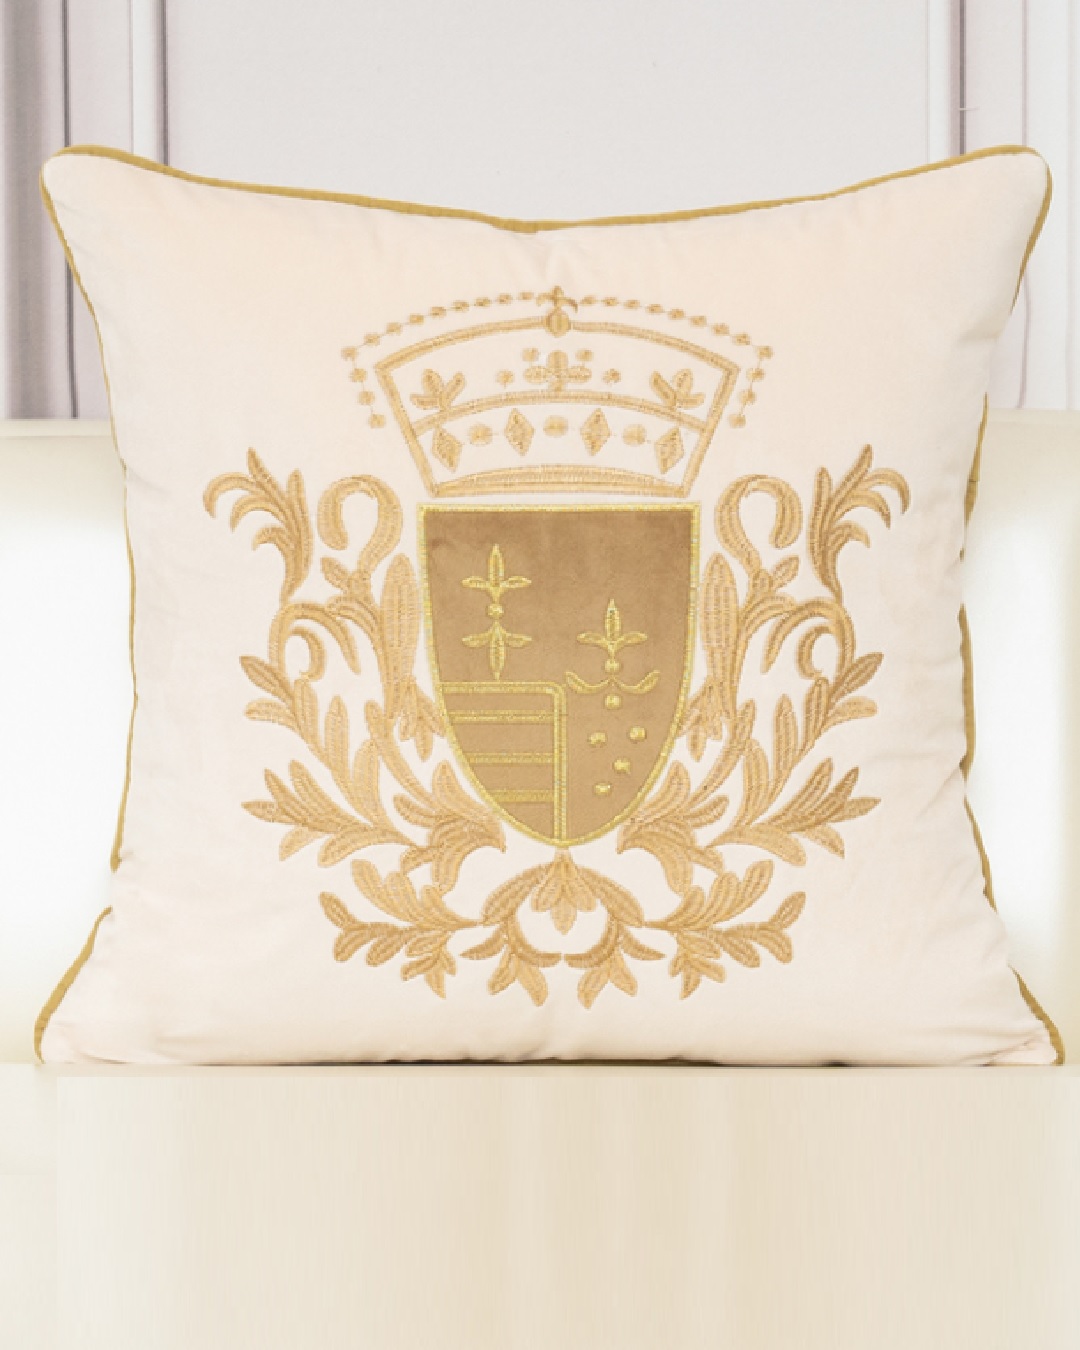 Beige and gold embroidered cushion